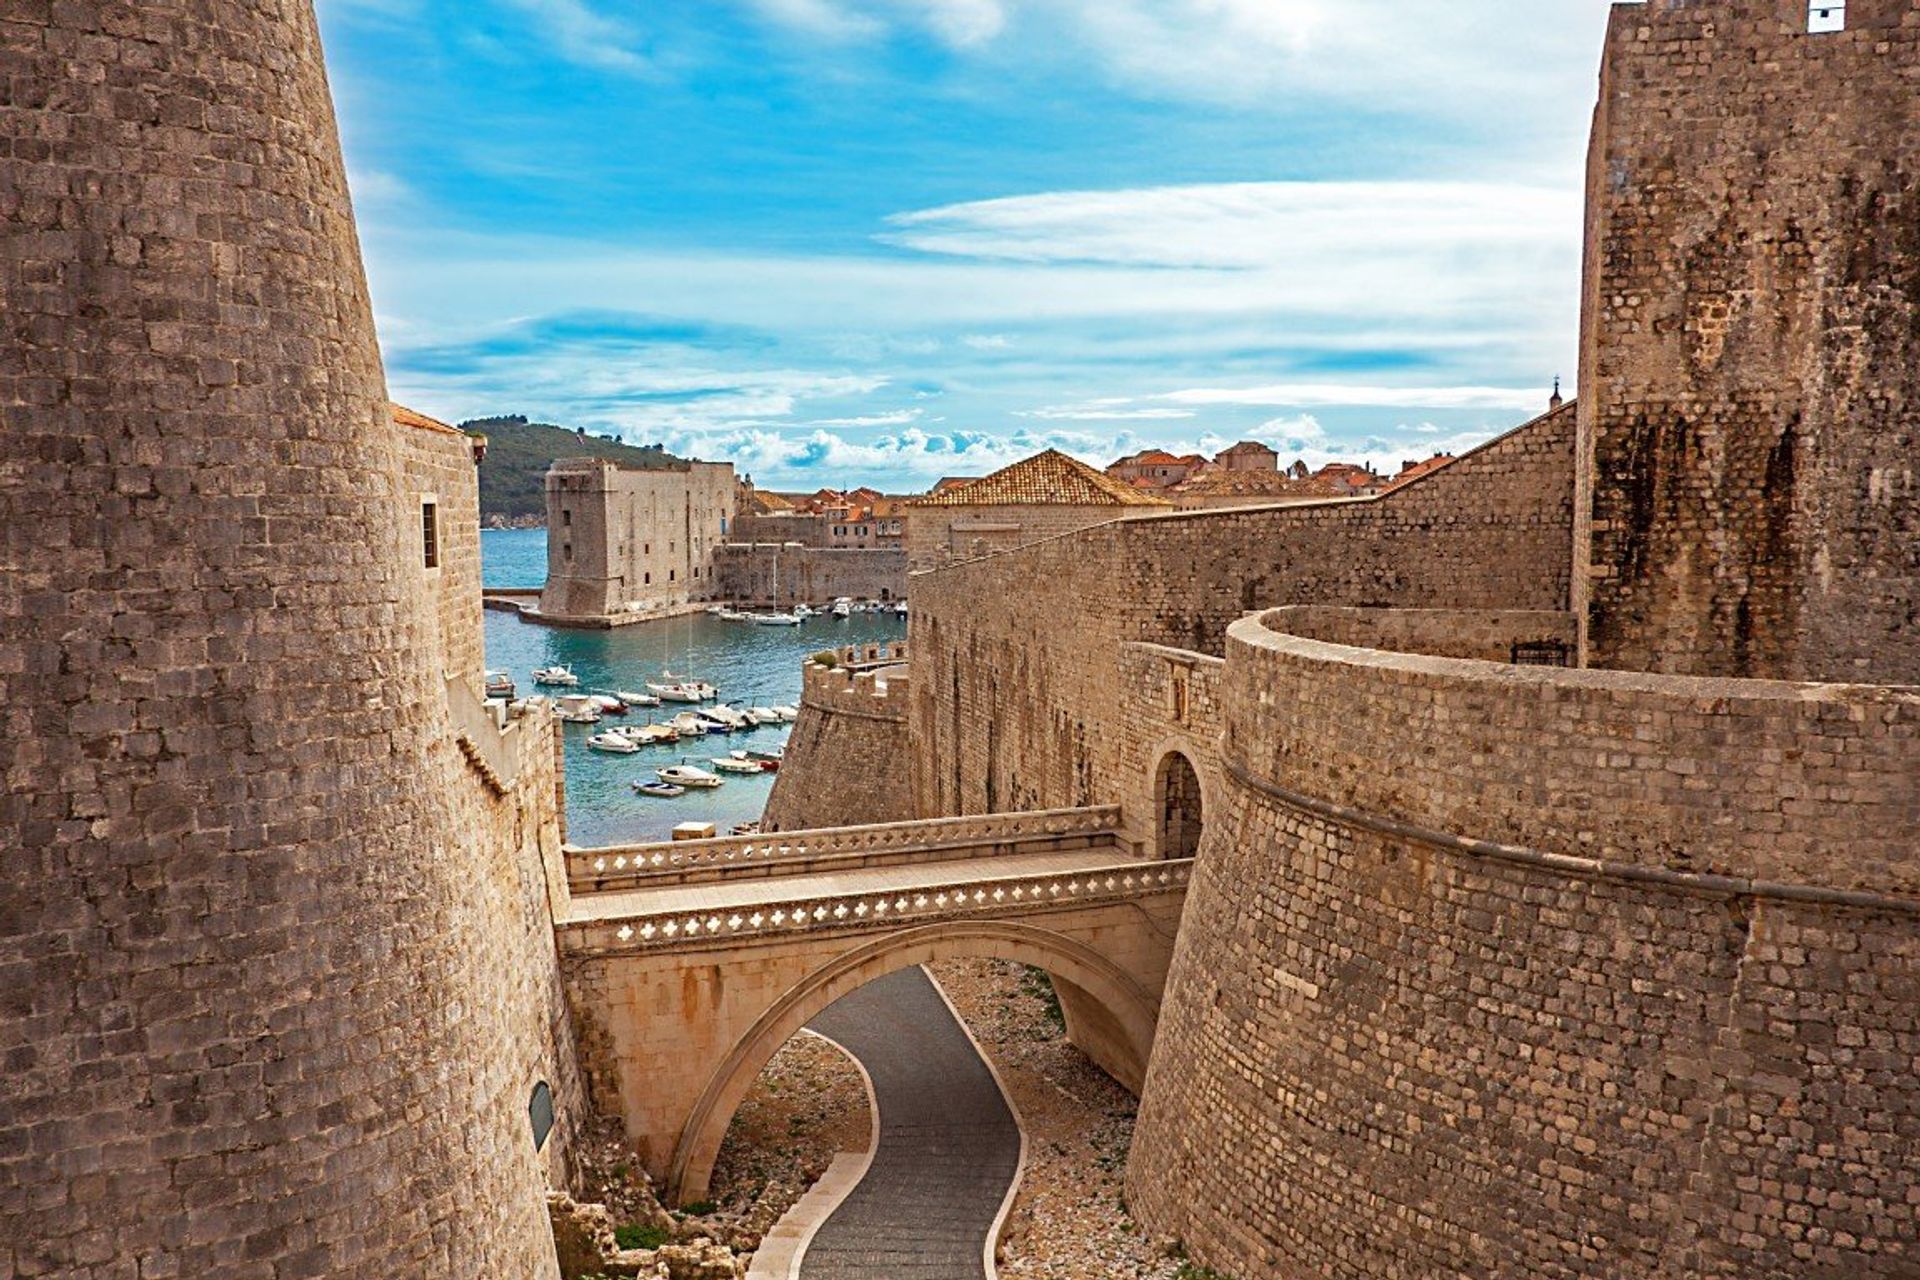 Dubrovnik's rich history can be felt with a trip to the incredible St John's Fortress, in the old quarter